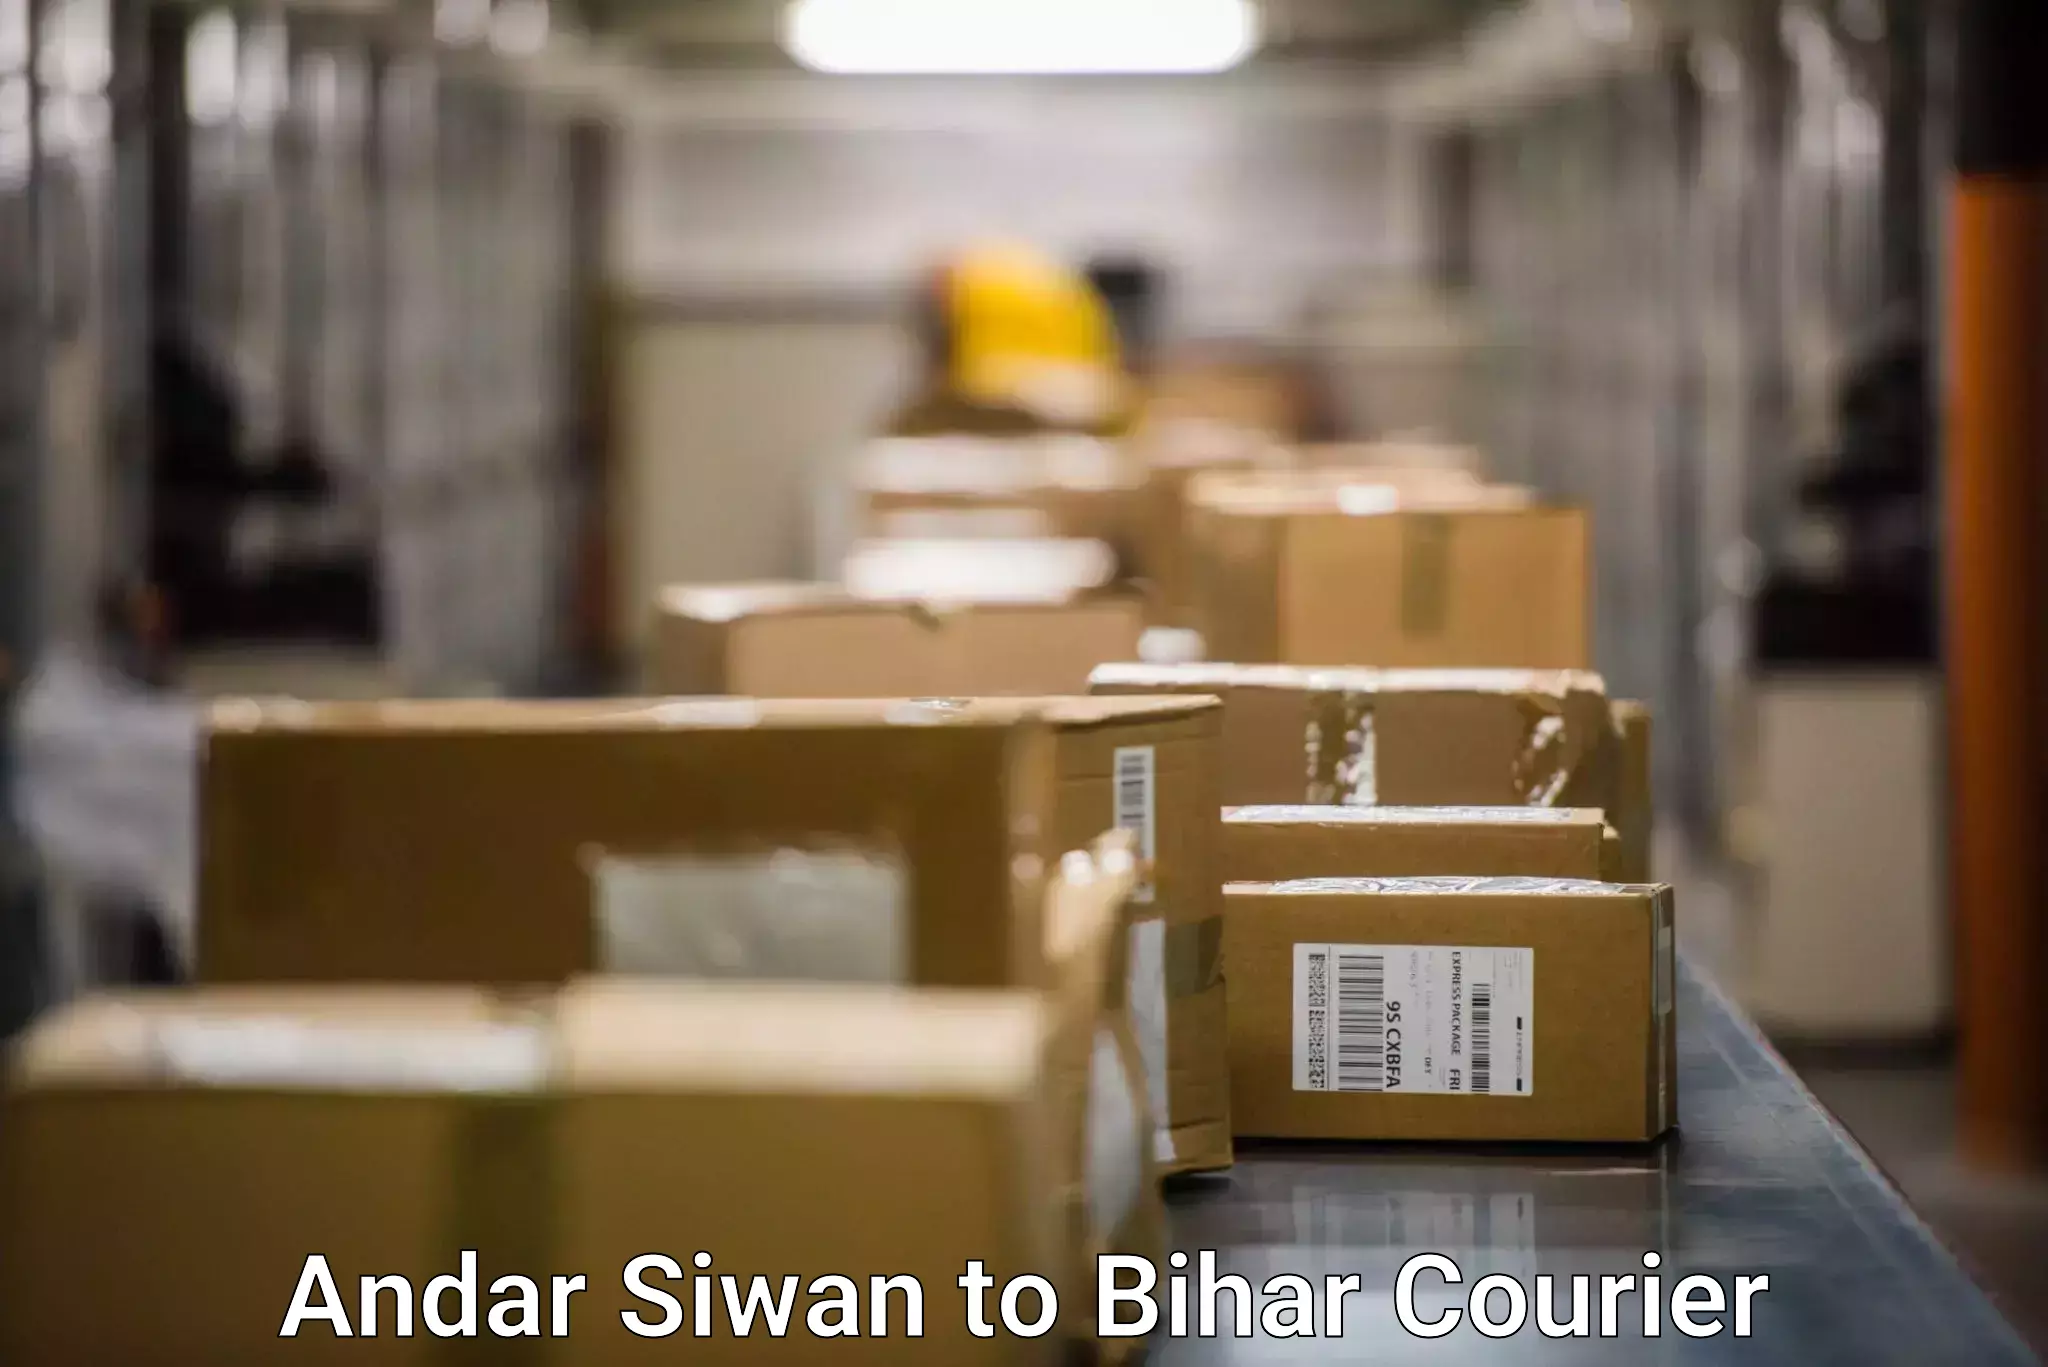 Personal courier services Andar Siwan to Piro